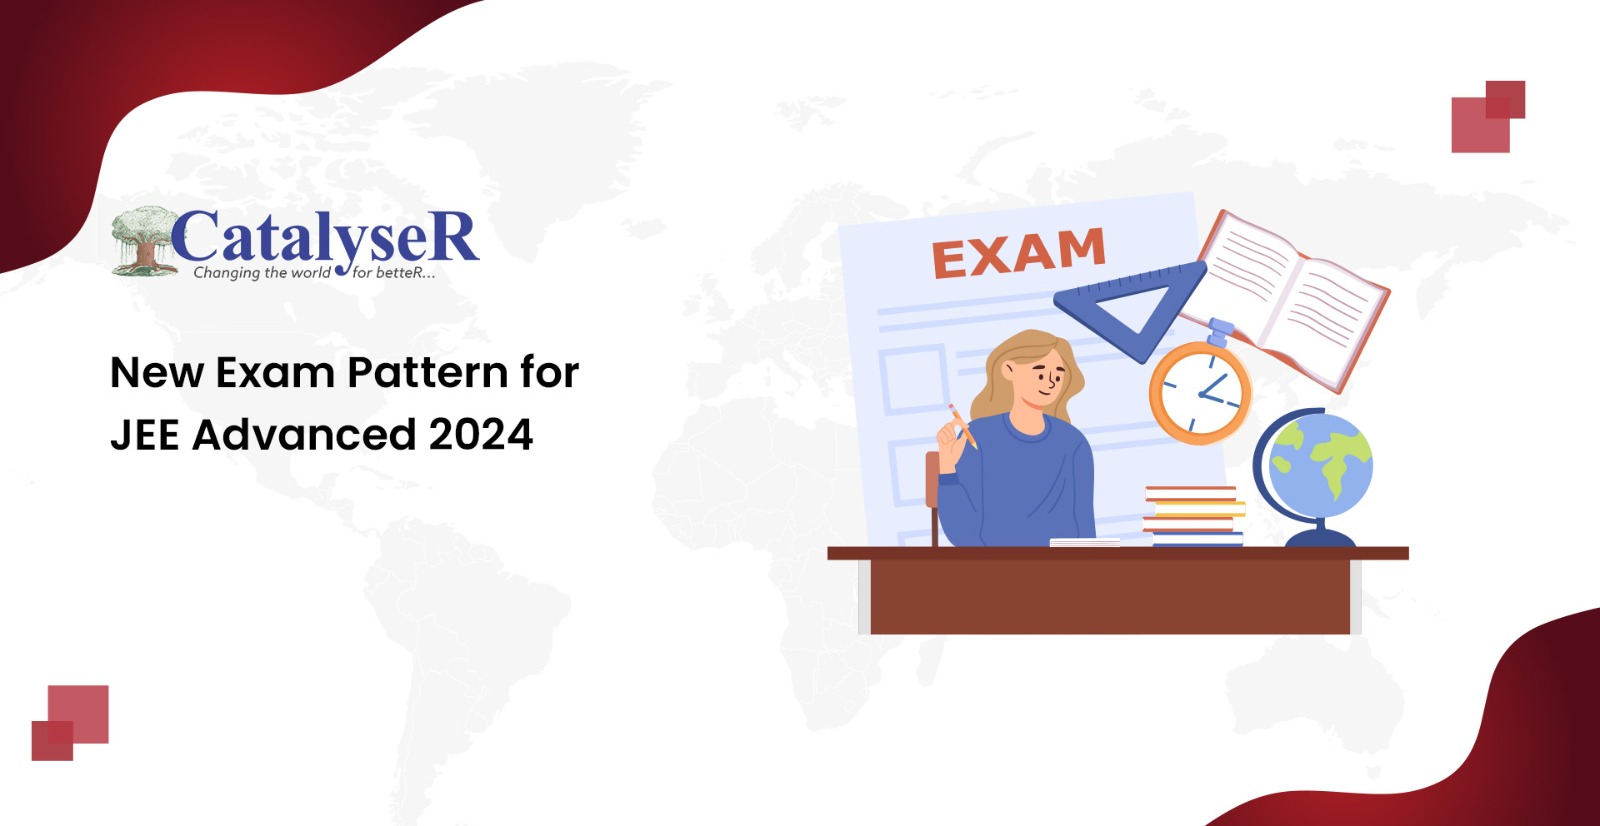 New Exam Pattern for JEE Advanced 2024